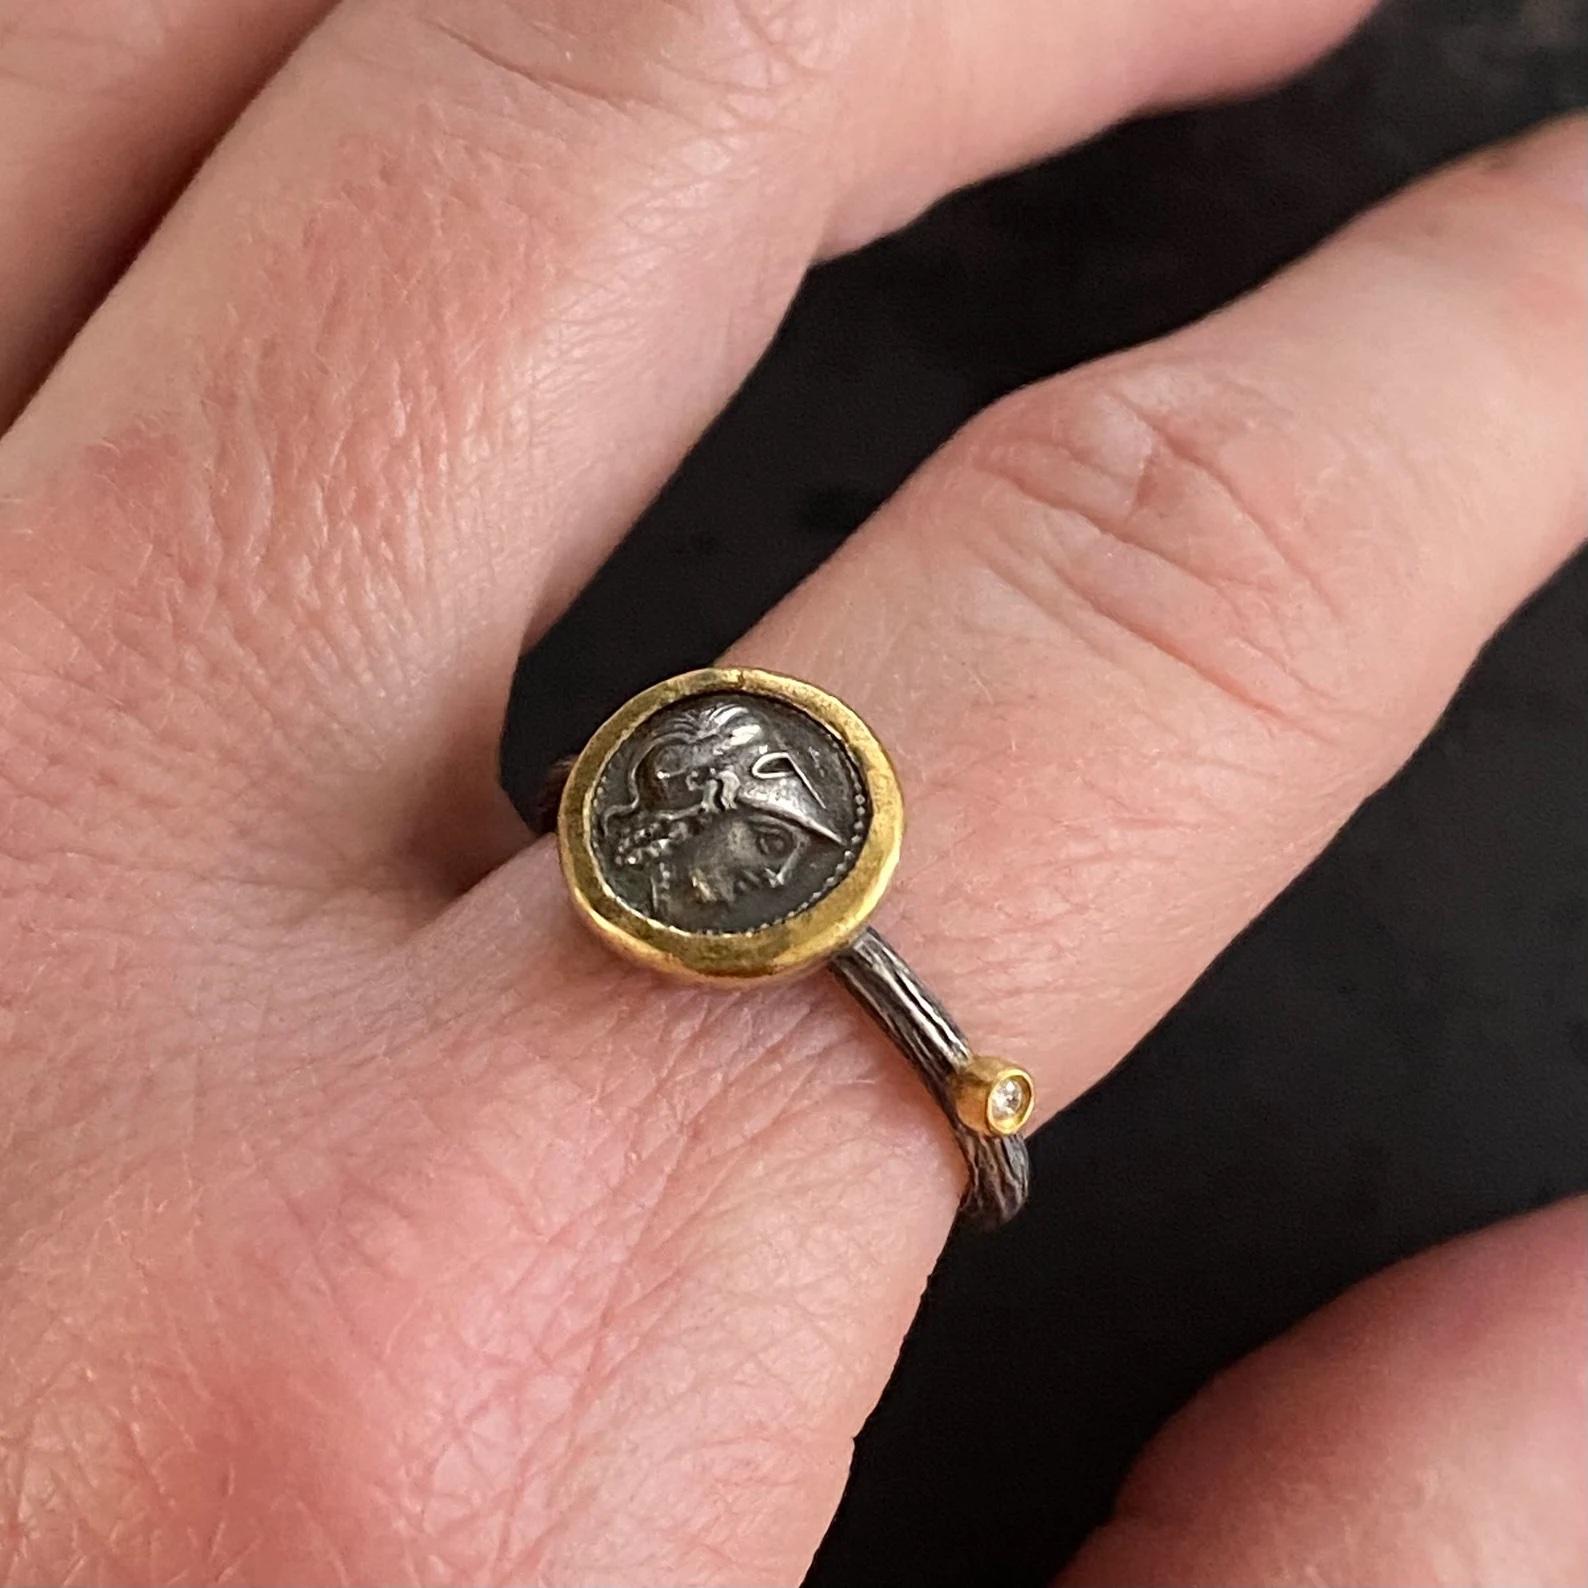 Athena Coin Ring with Single Diamond, Goddess of Wisdom and War, 24K Gold & SS, Size 6 1/2 
Athena is the Olympian goddess of wisdom and war and the adored patroness of the city of Athens. A virgin deity, she was also – somewhat paradoxically –